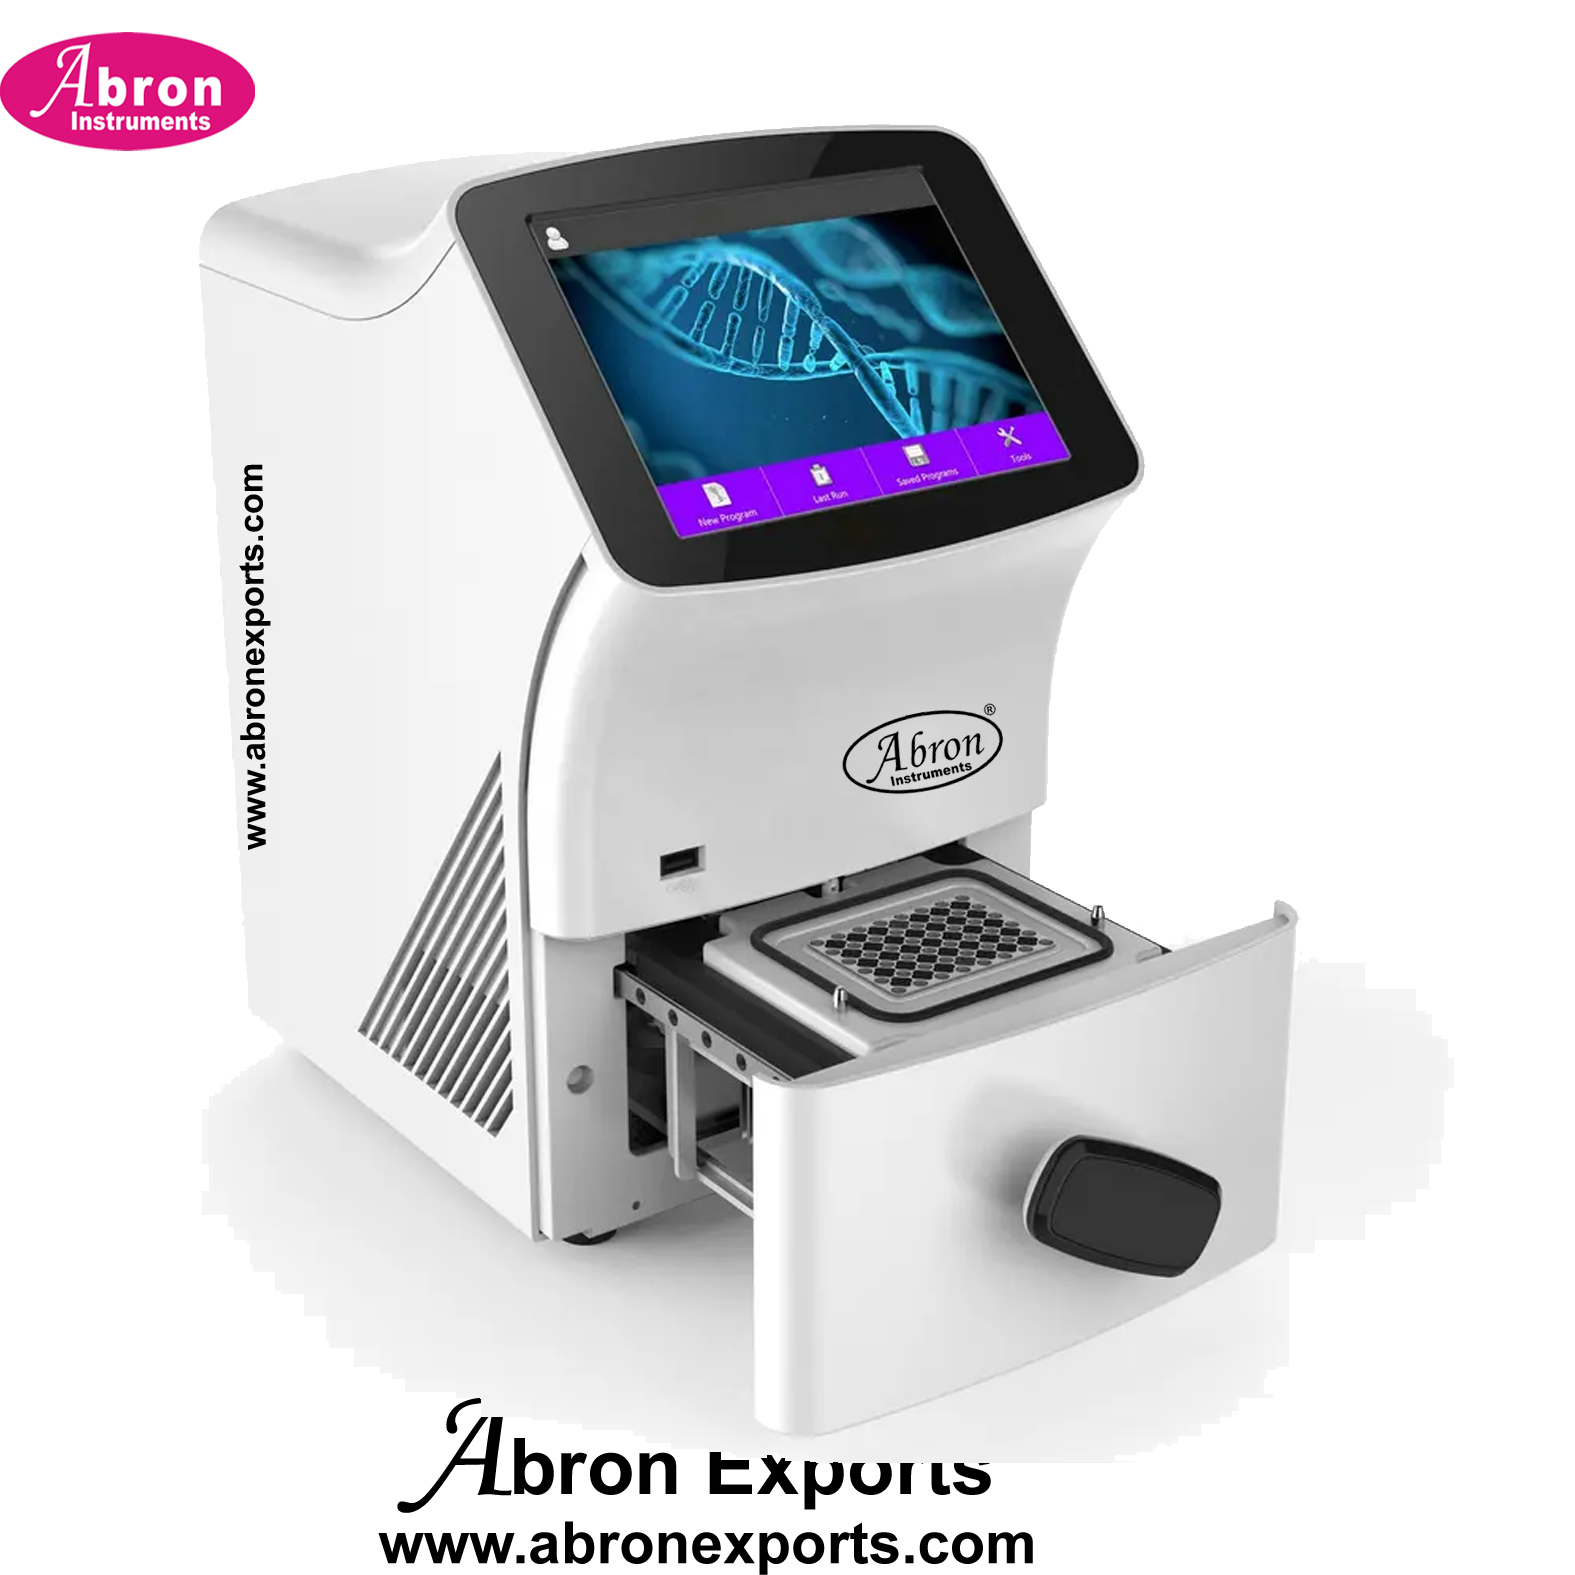 Real time RT PCR Test DNA Thermal Cycler Machine fully automated PCR and extraction system Abron ABM-2718RT 